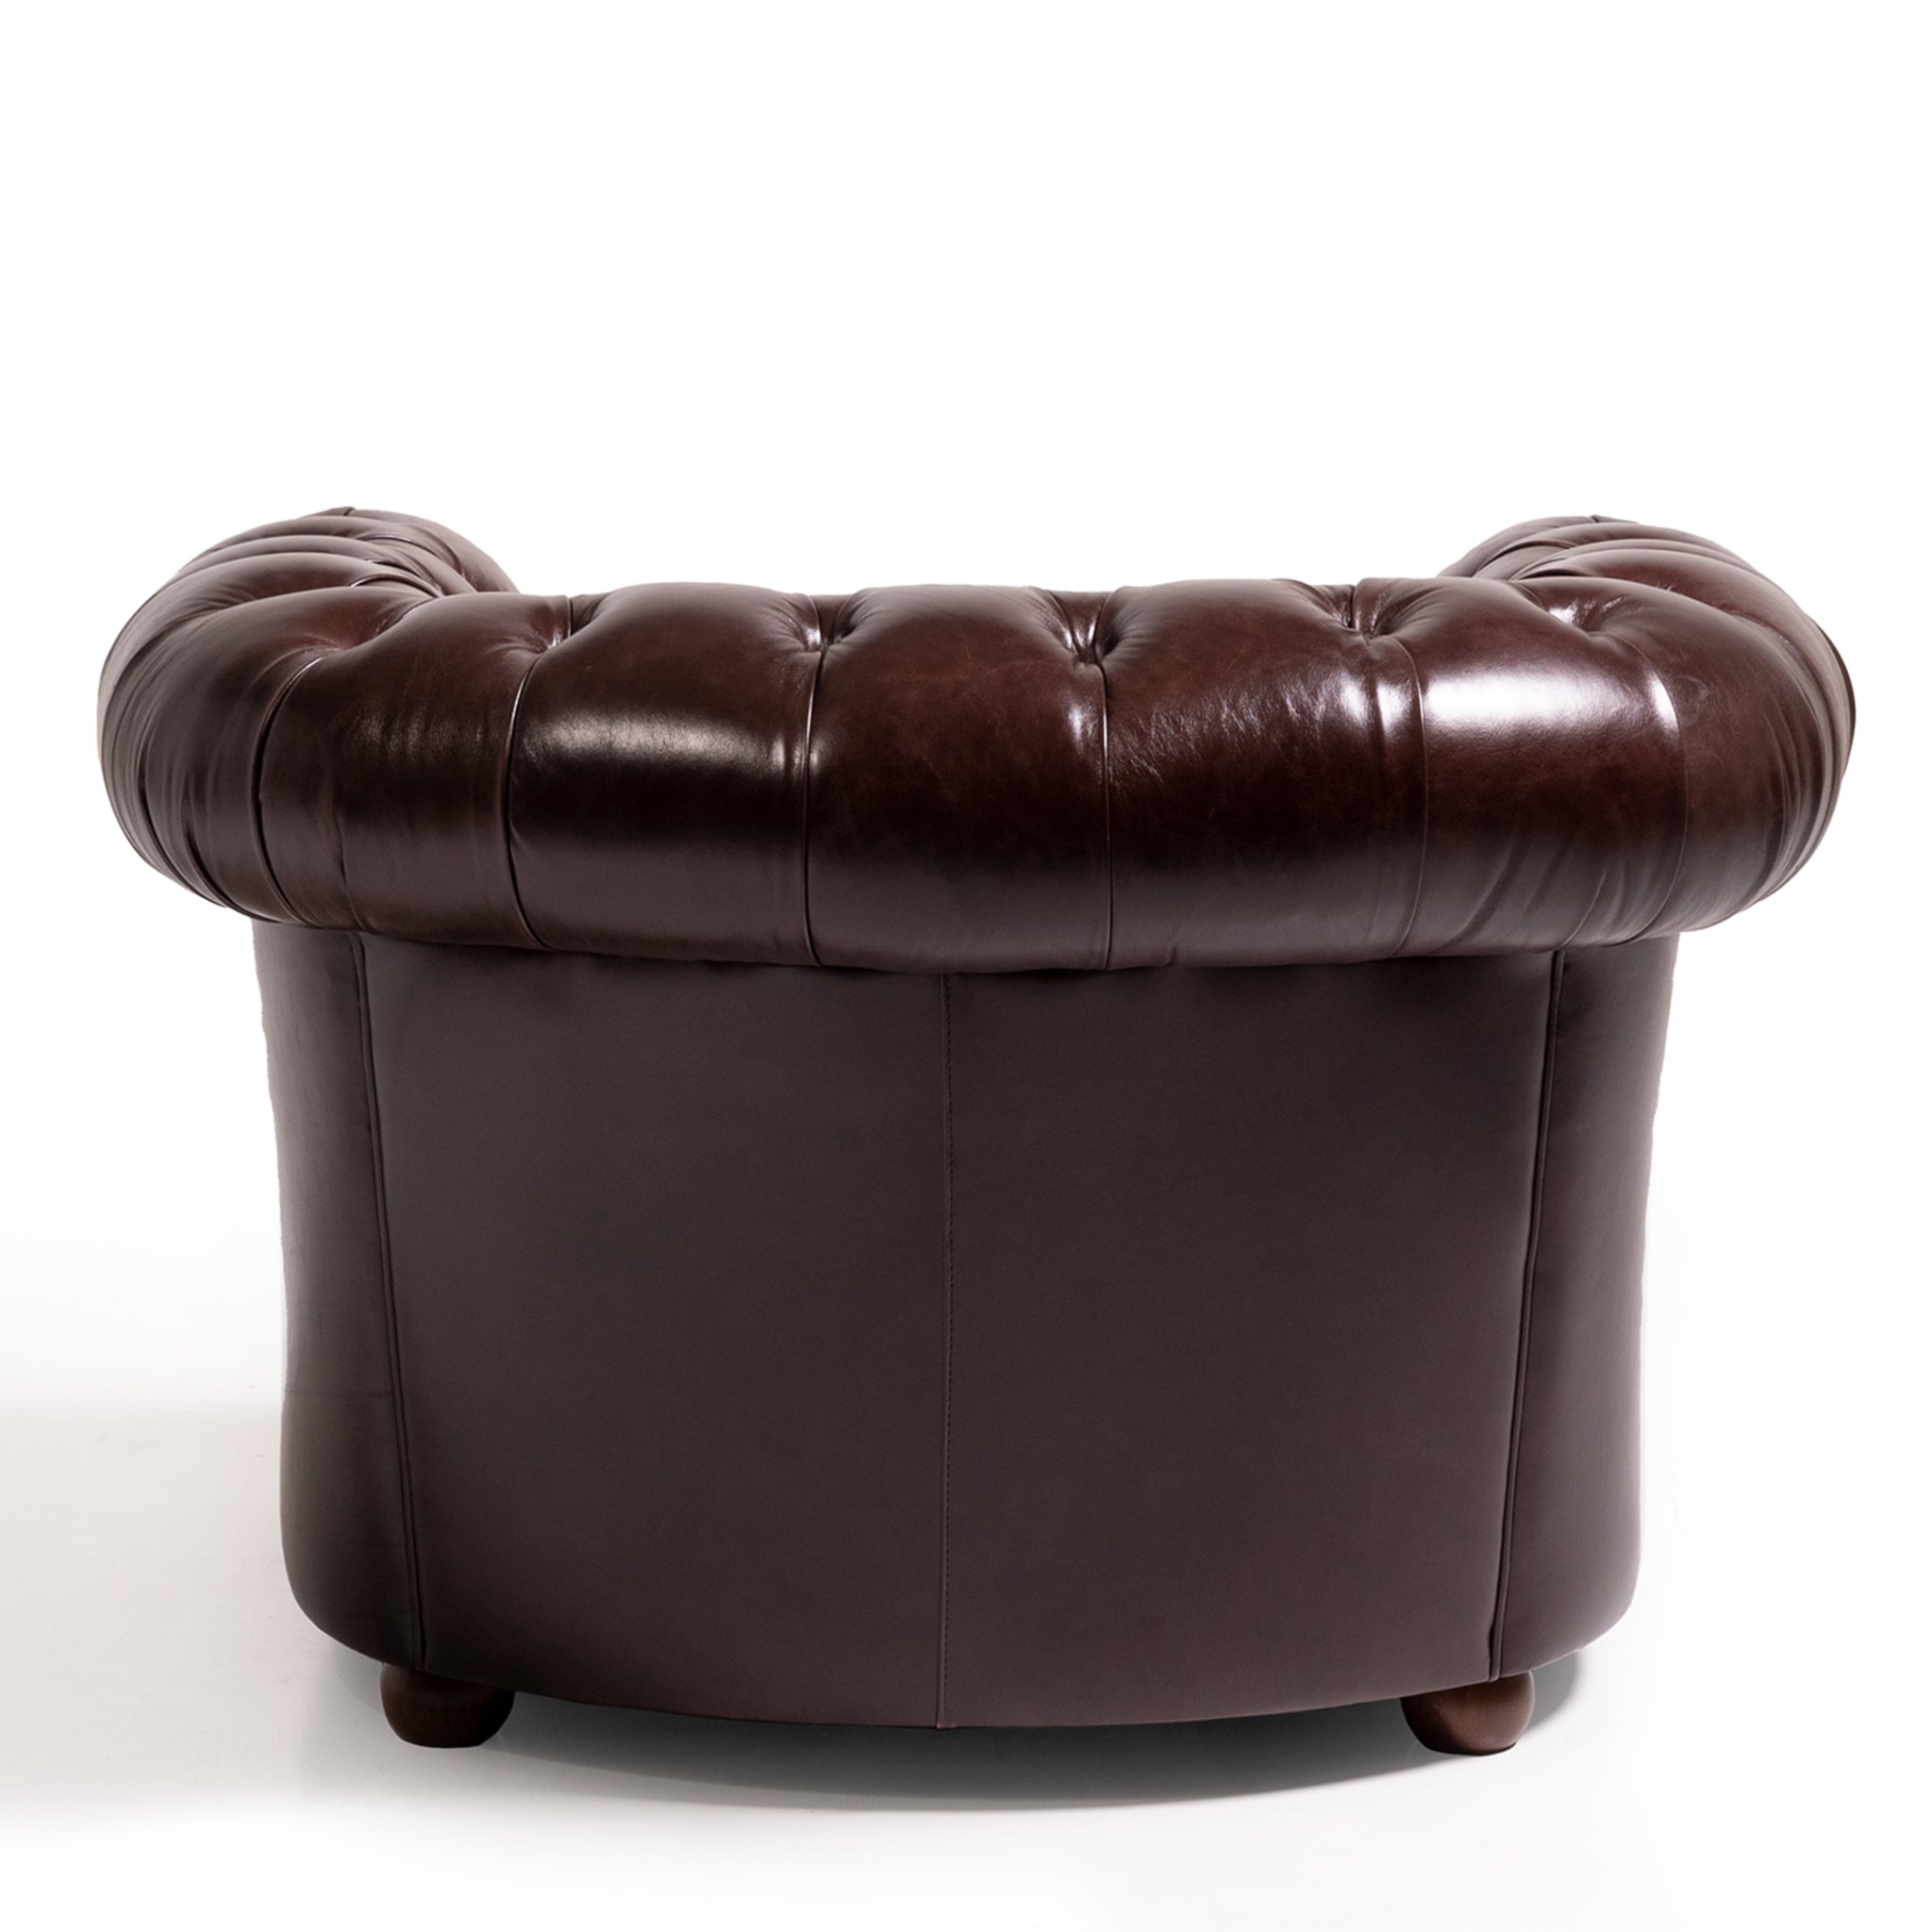 Chesterfield Brown Leather Armchair - Alternative view 2